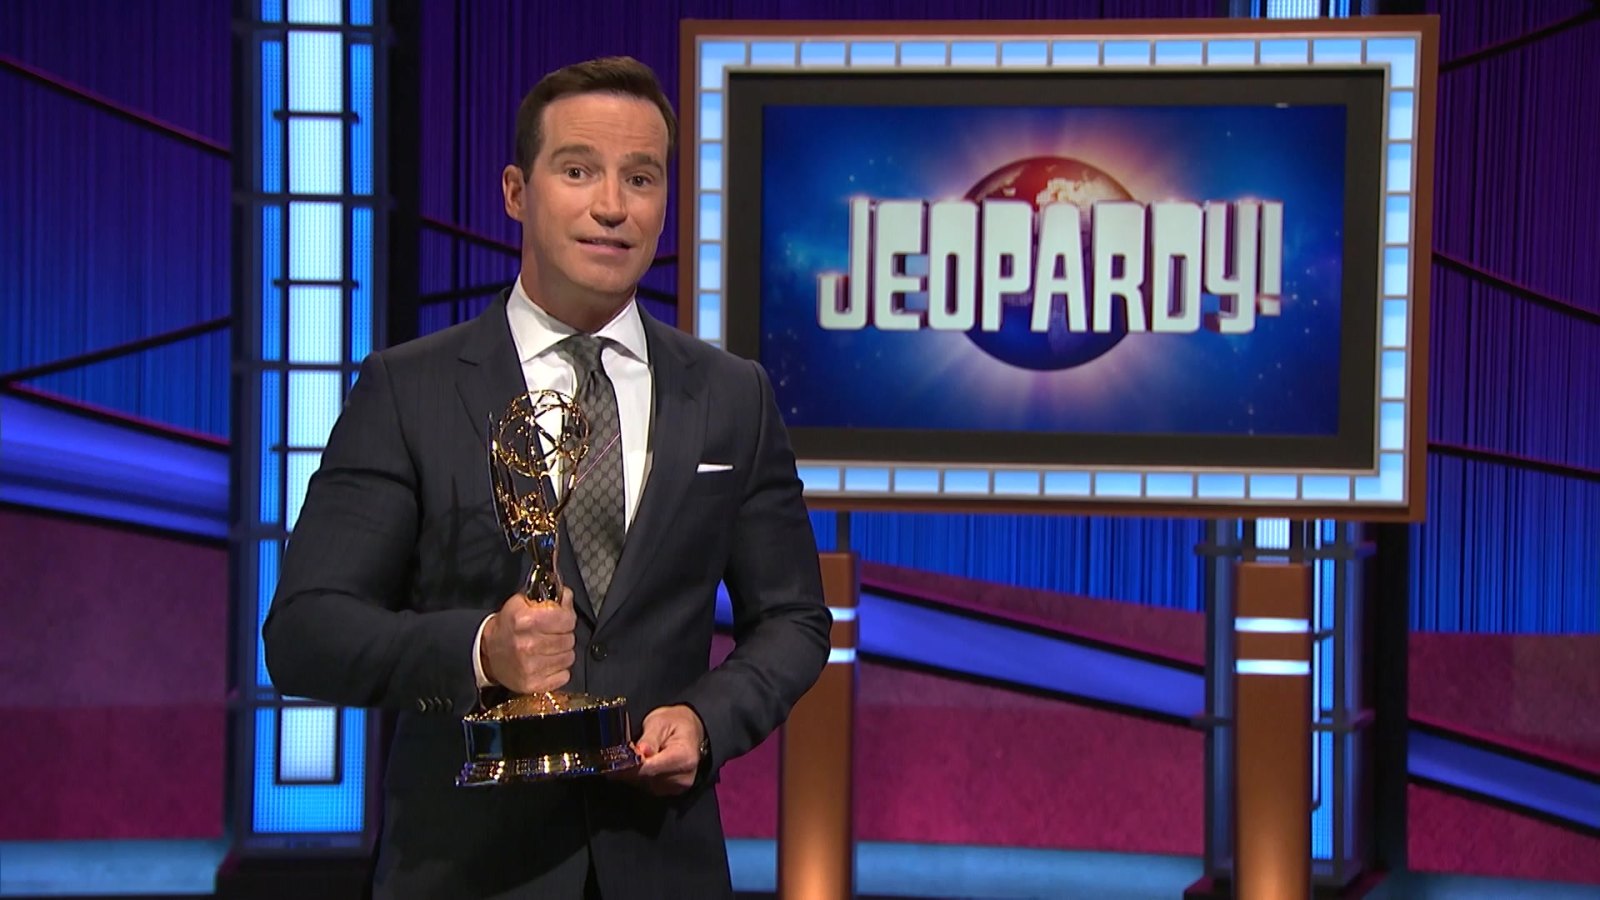 Who Is Mike Richards? 5 Things to Know About the Producer Who Became 'Jeopardy' Host